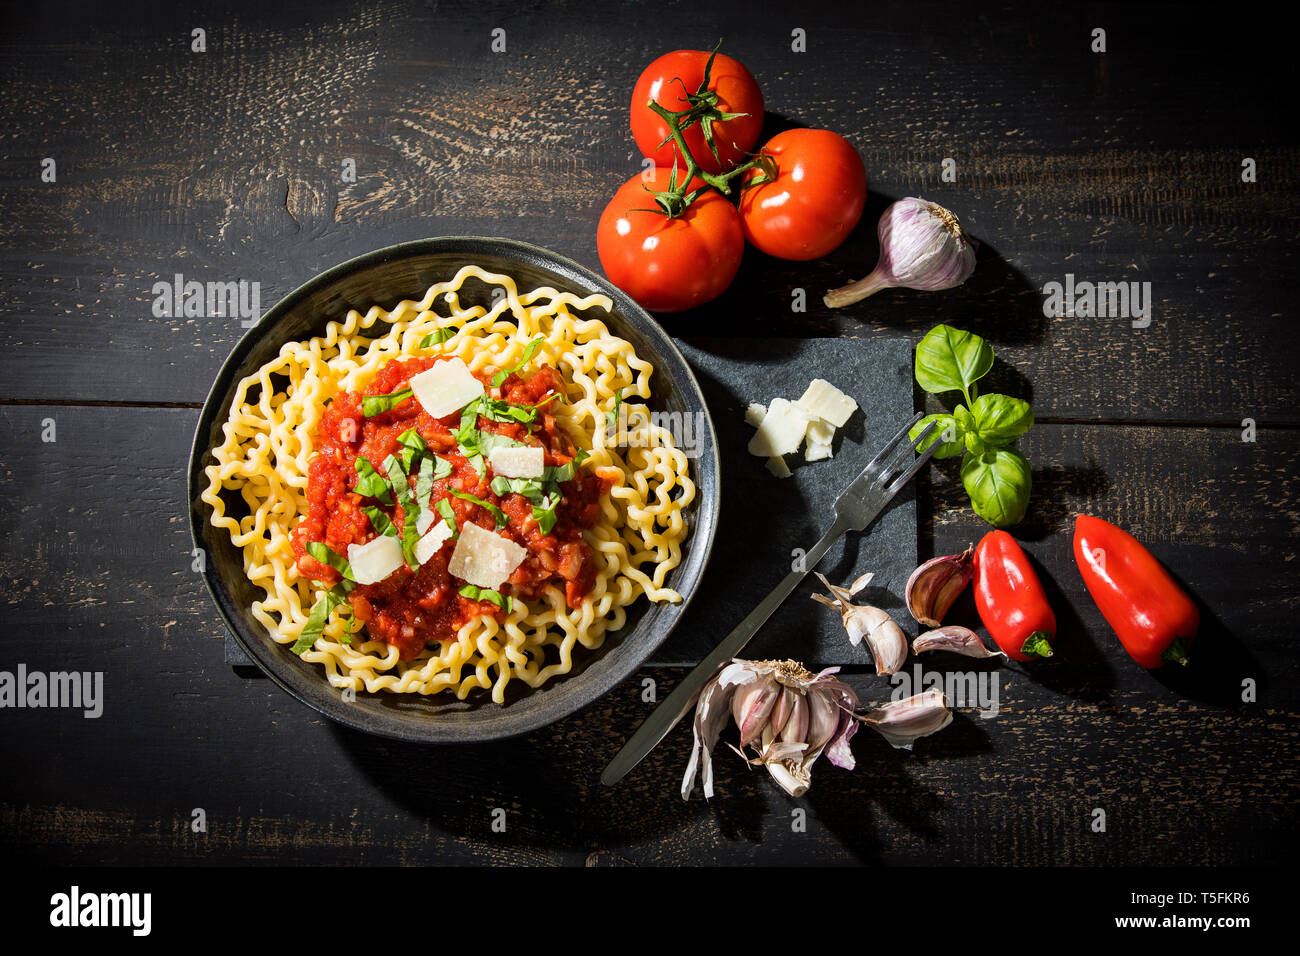 Pasta al Pomodoro, fusilli lunghi with tomato sauce, garlic, basil, parmesan cheese and red peppers Stock Photo